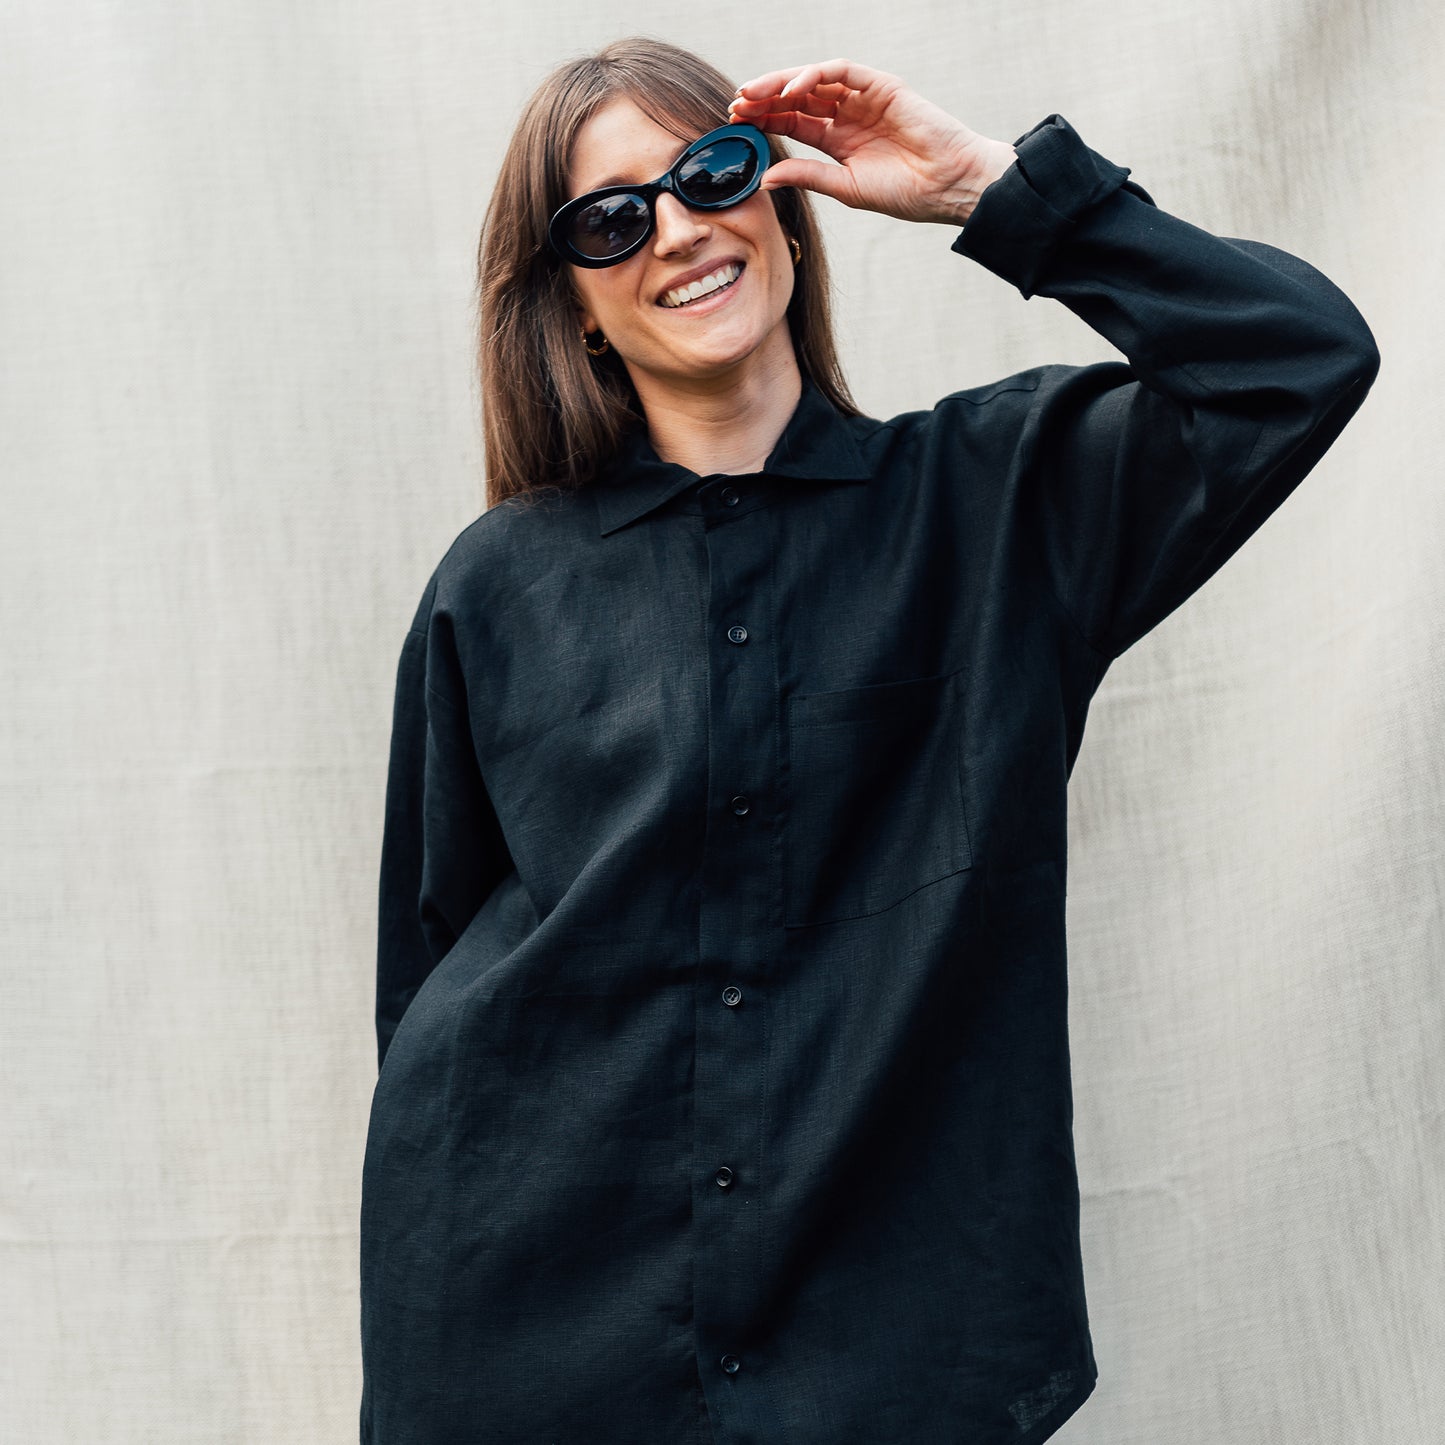 Auór Paloma Sunglasses Black styled with LOUAL Linen Shirt in Black